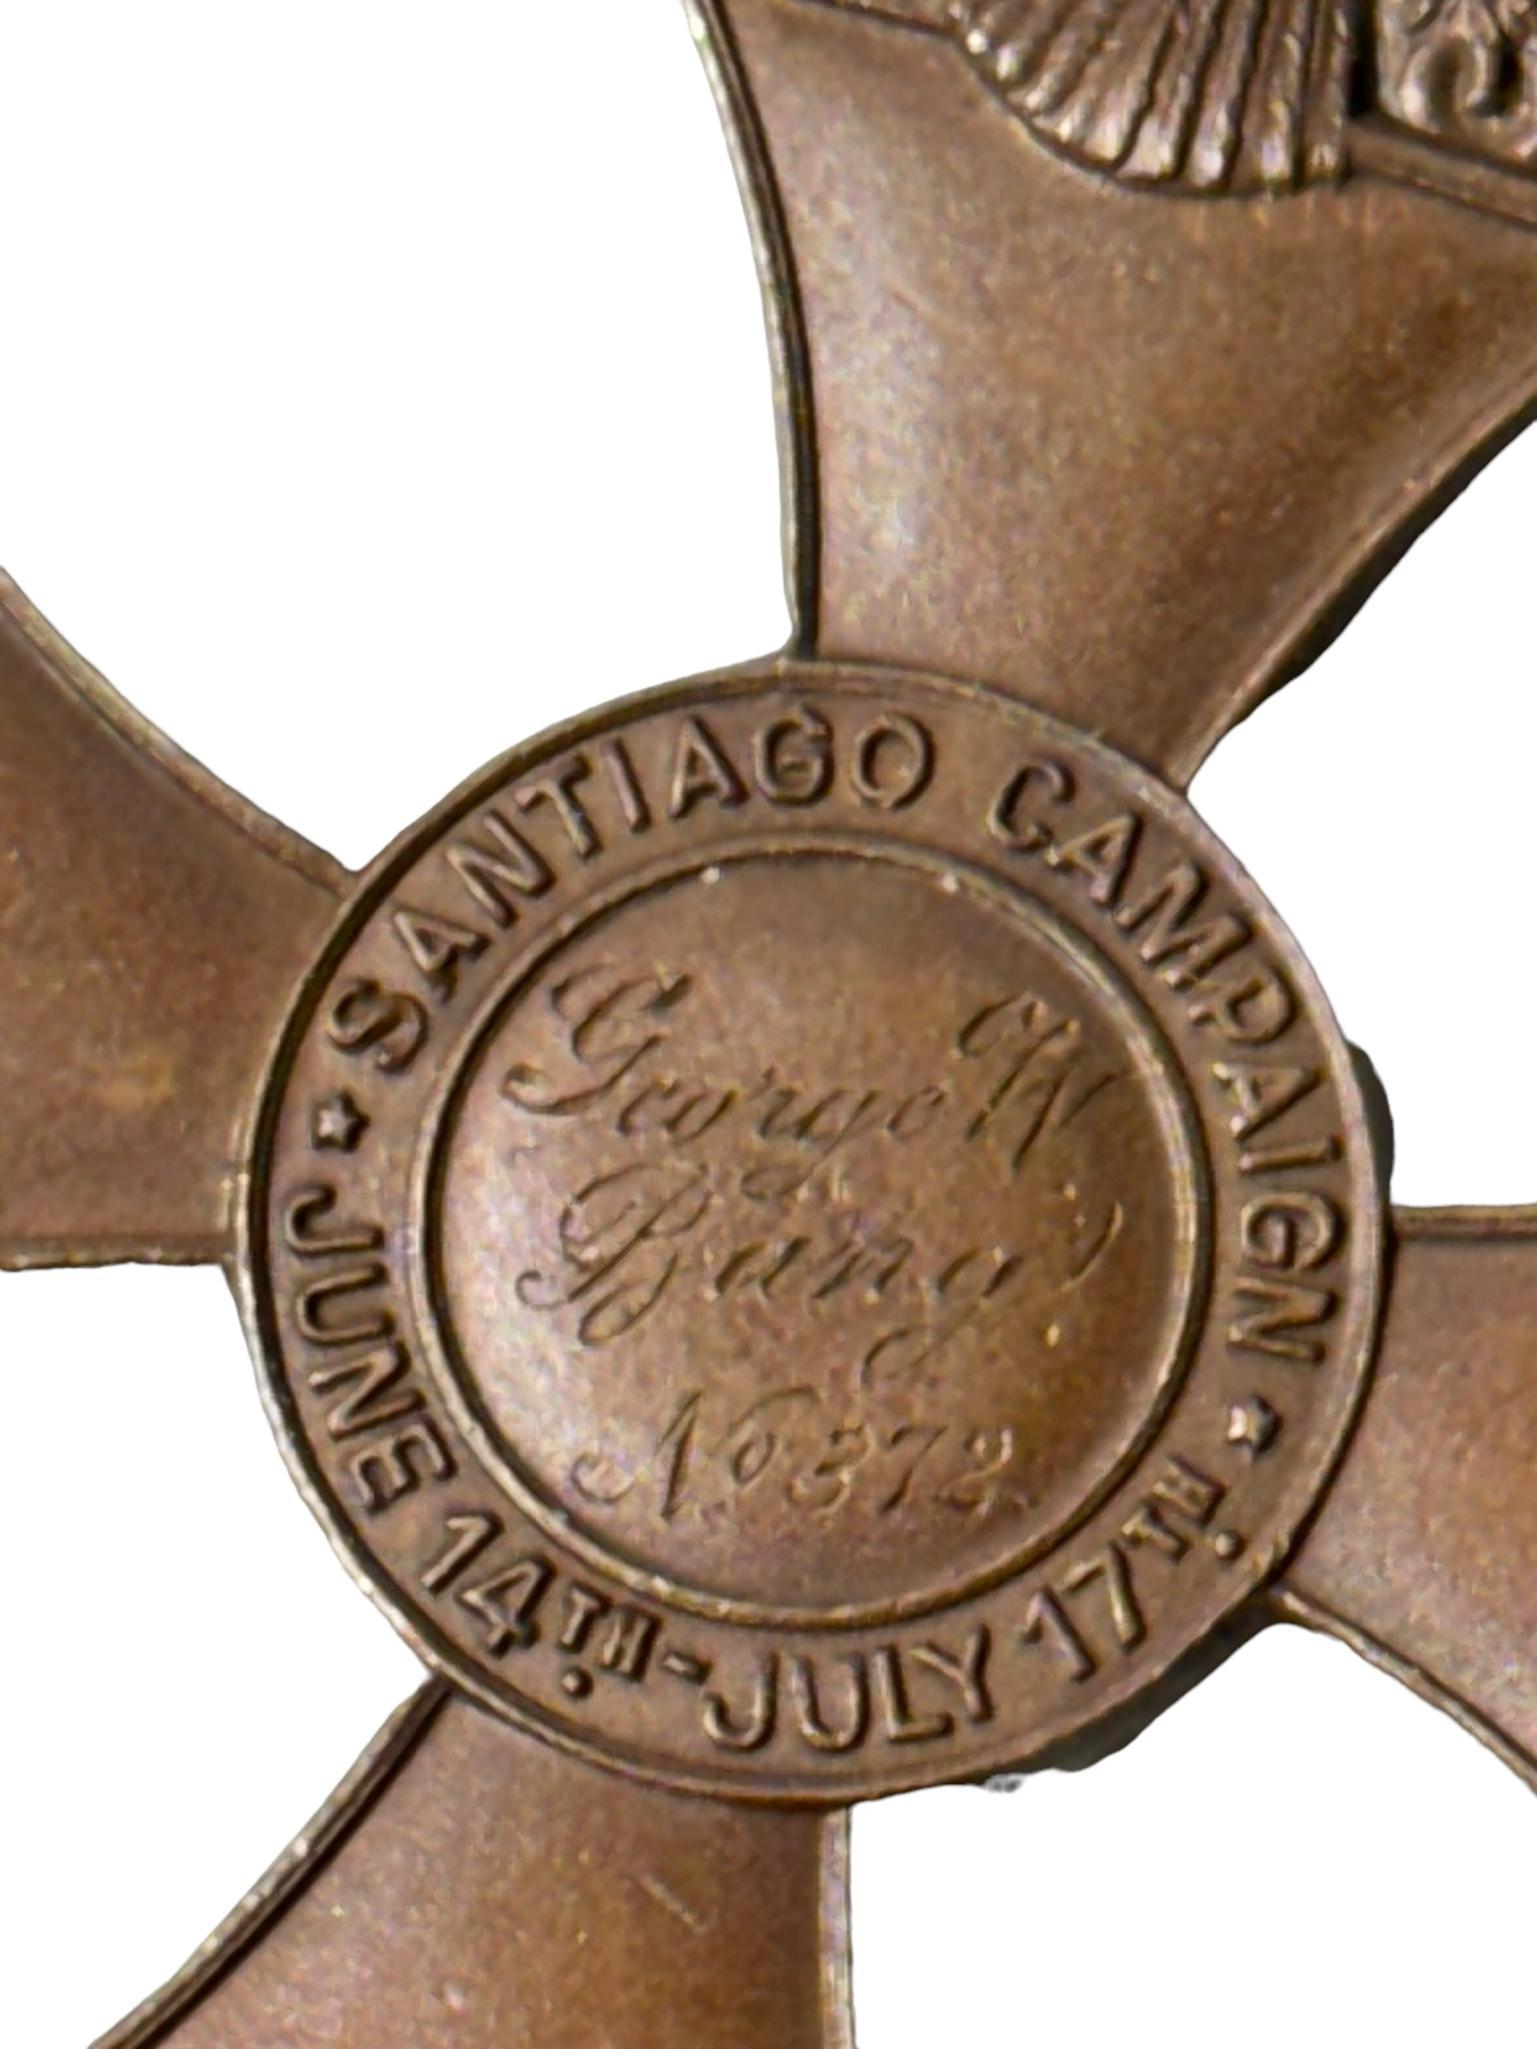 SOCIETY OF ARMY OF SANTIAGO MEDAL No. & ENGRAVED